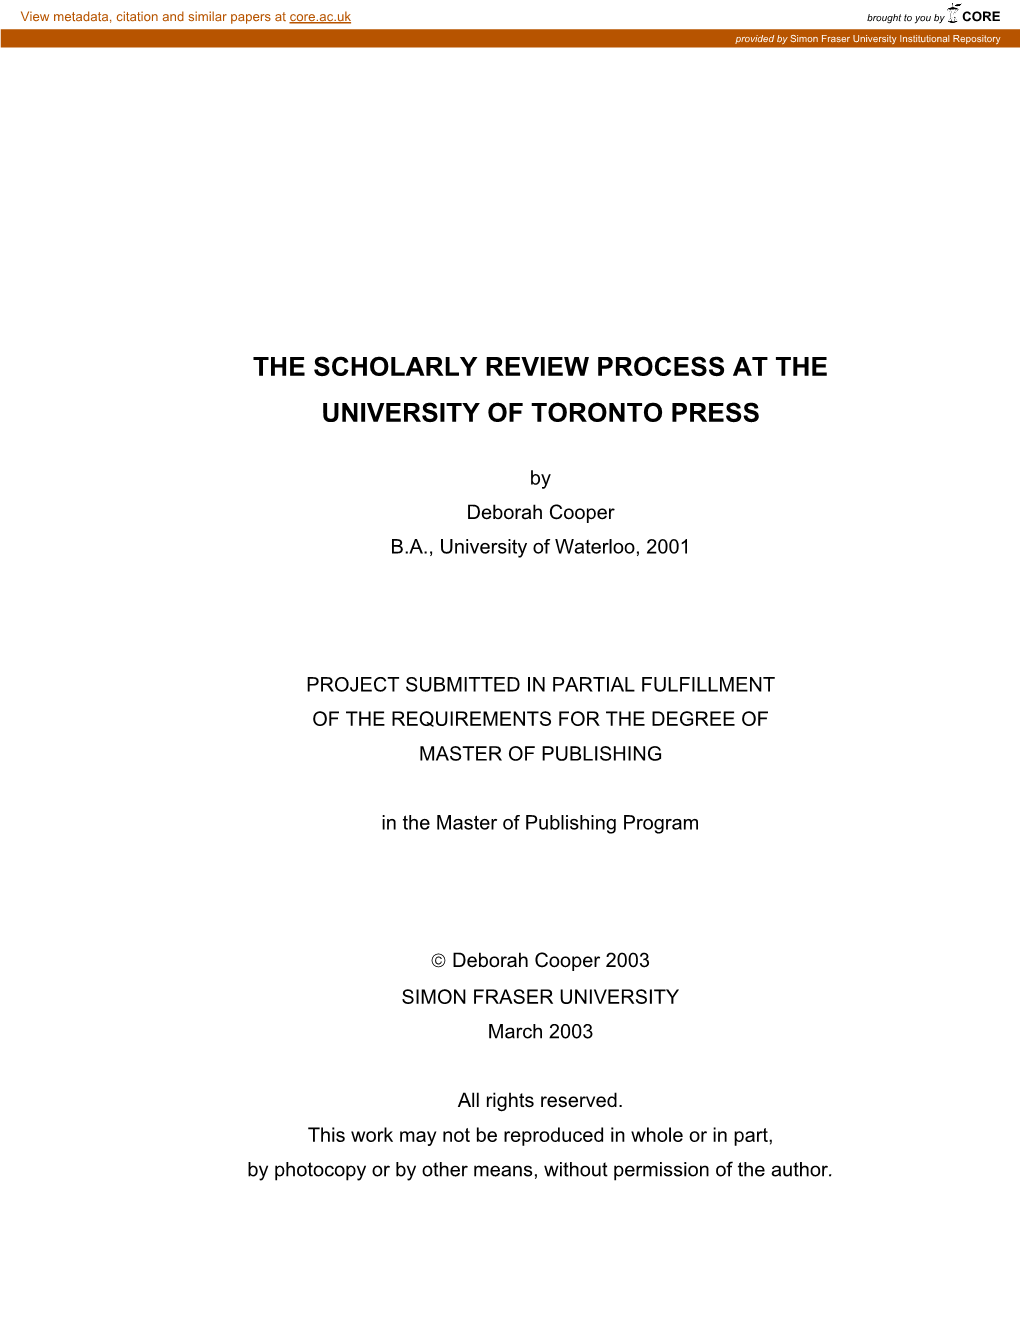 The Scholarly Review Process at the University of Toronto Press